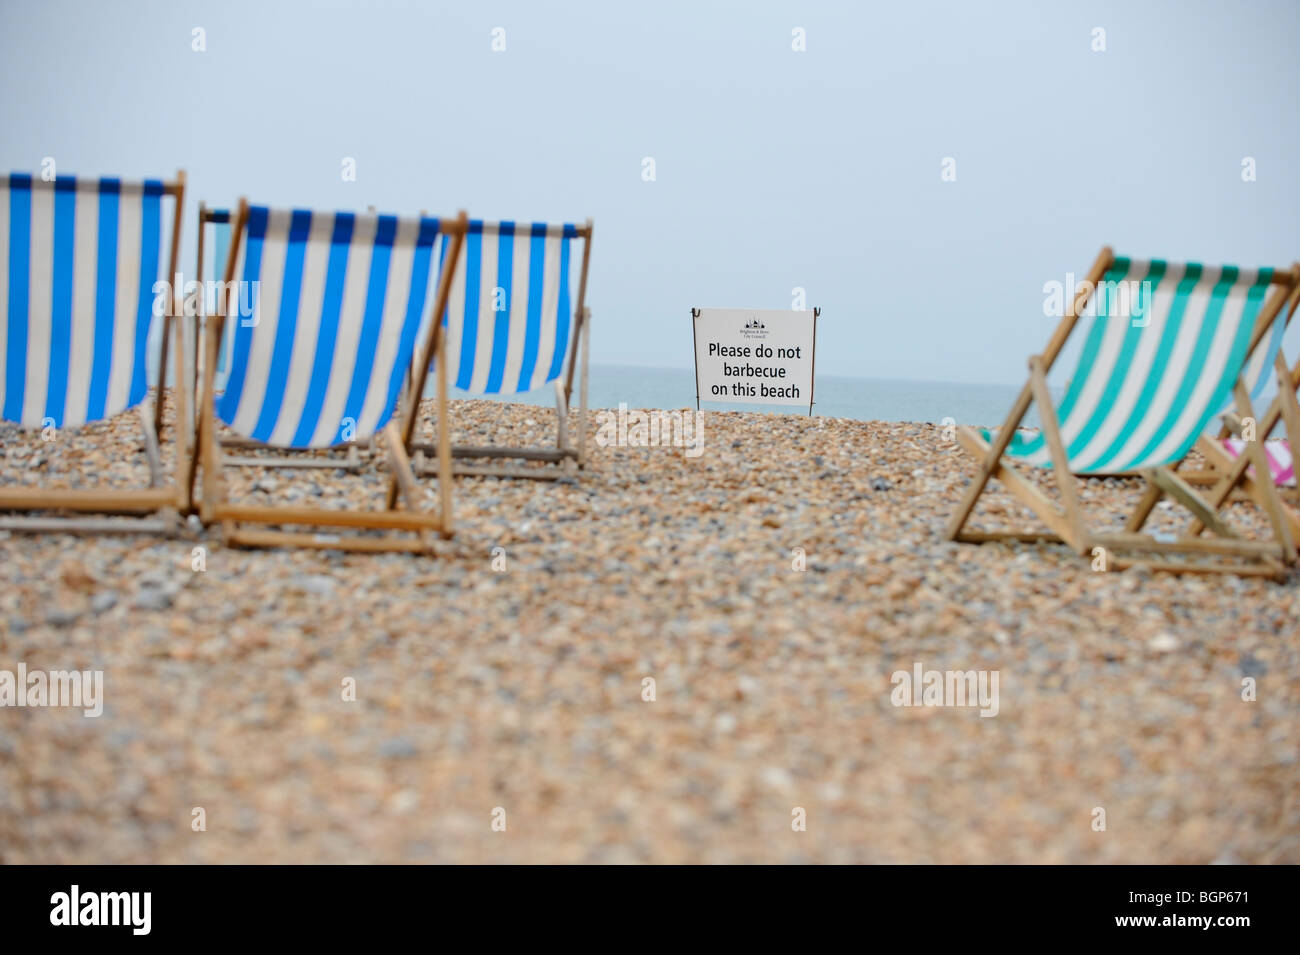 Beach safety on Brighton beach in East Sussex. A public safety sign asks 'please do not barbecue on the beach'. Stock Photo